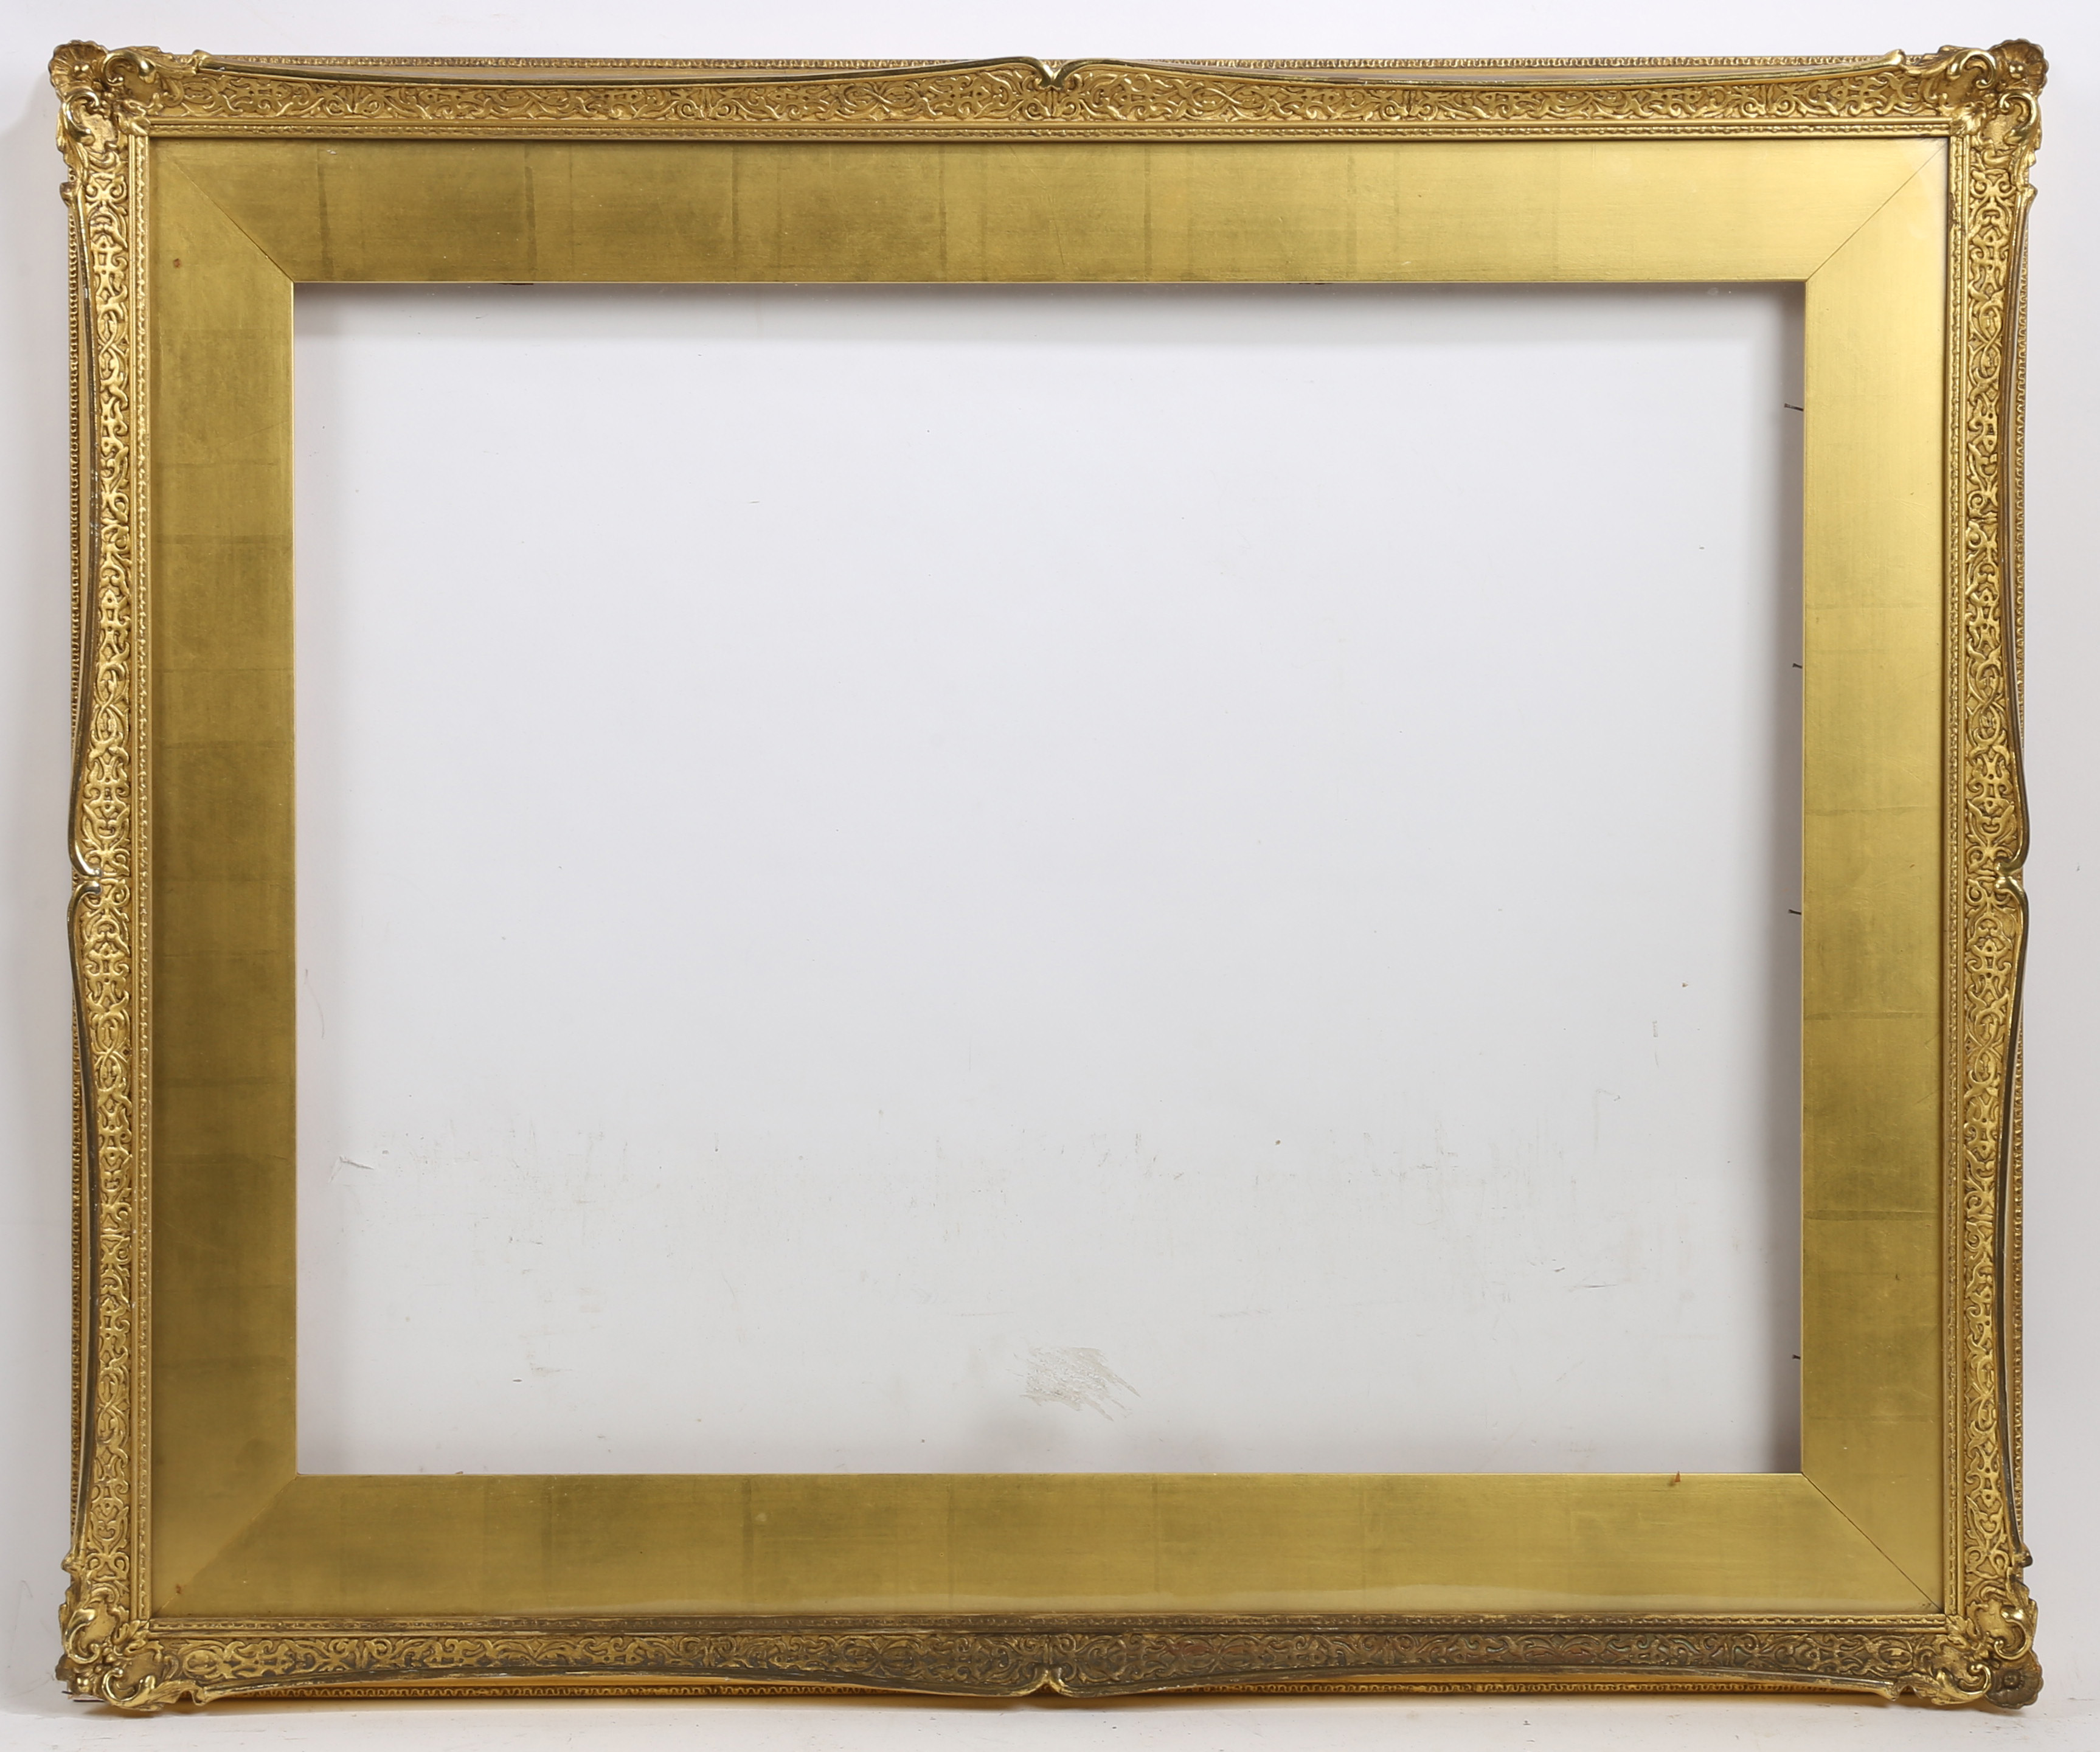 19th century English swept watercolour frame with corners and centre - rebate size 24in x 19in - Image 3 of 3